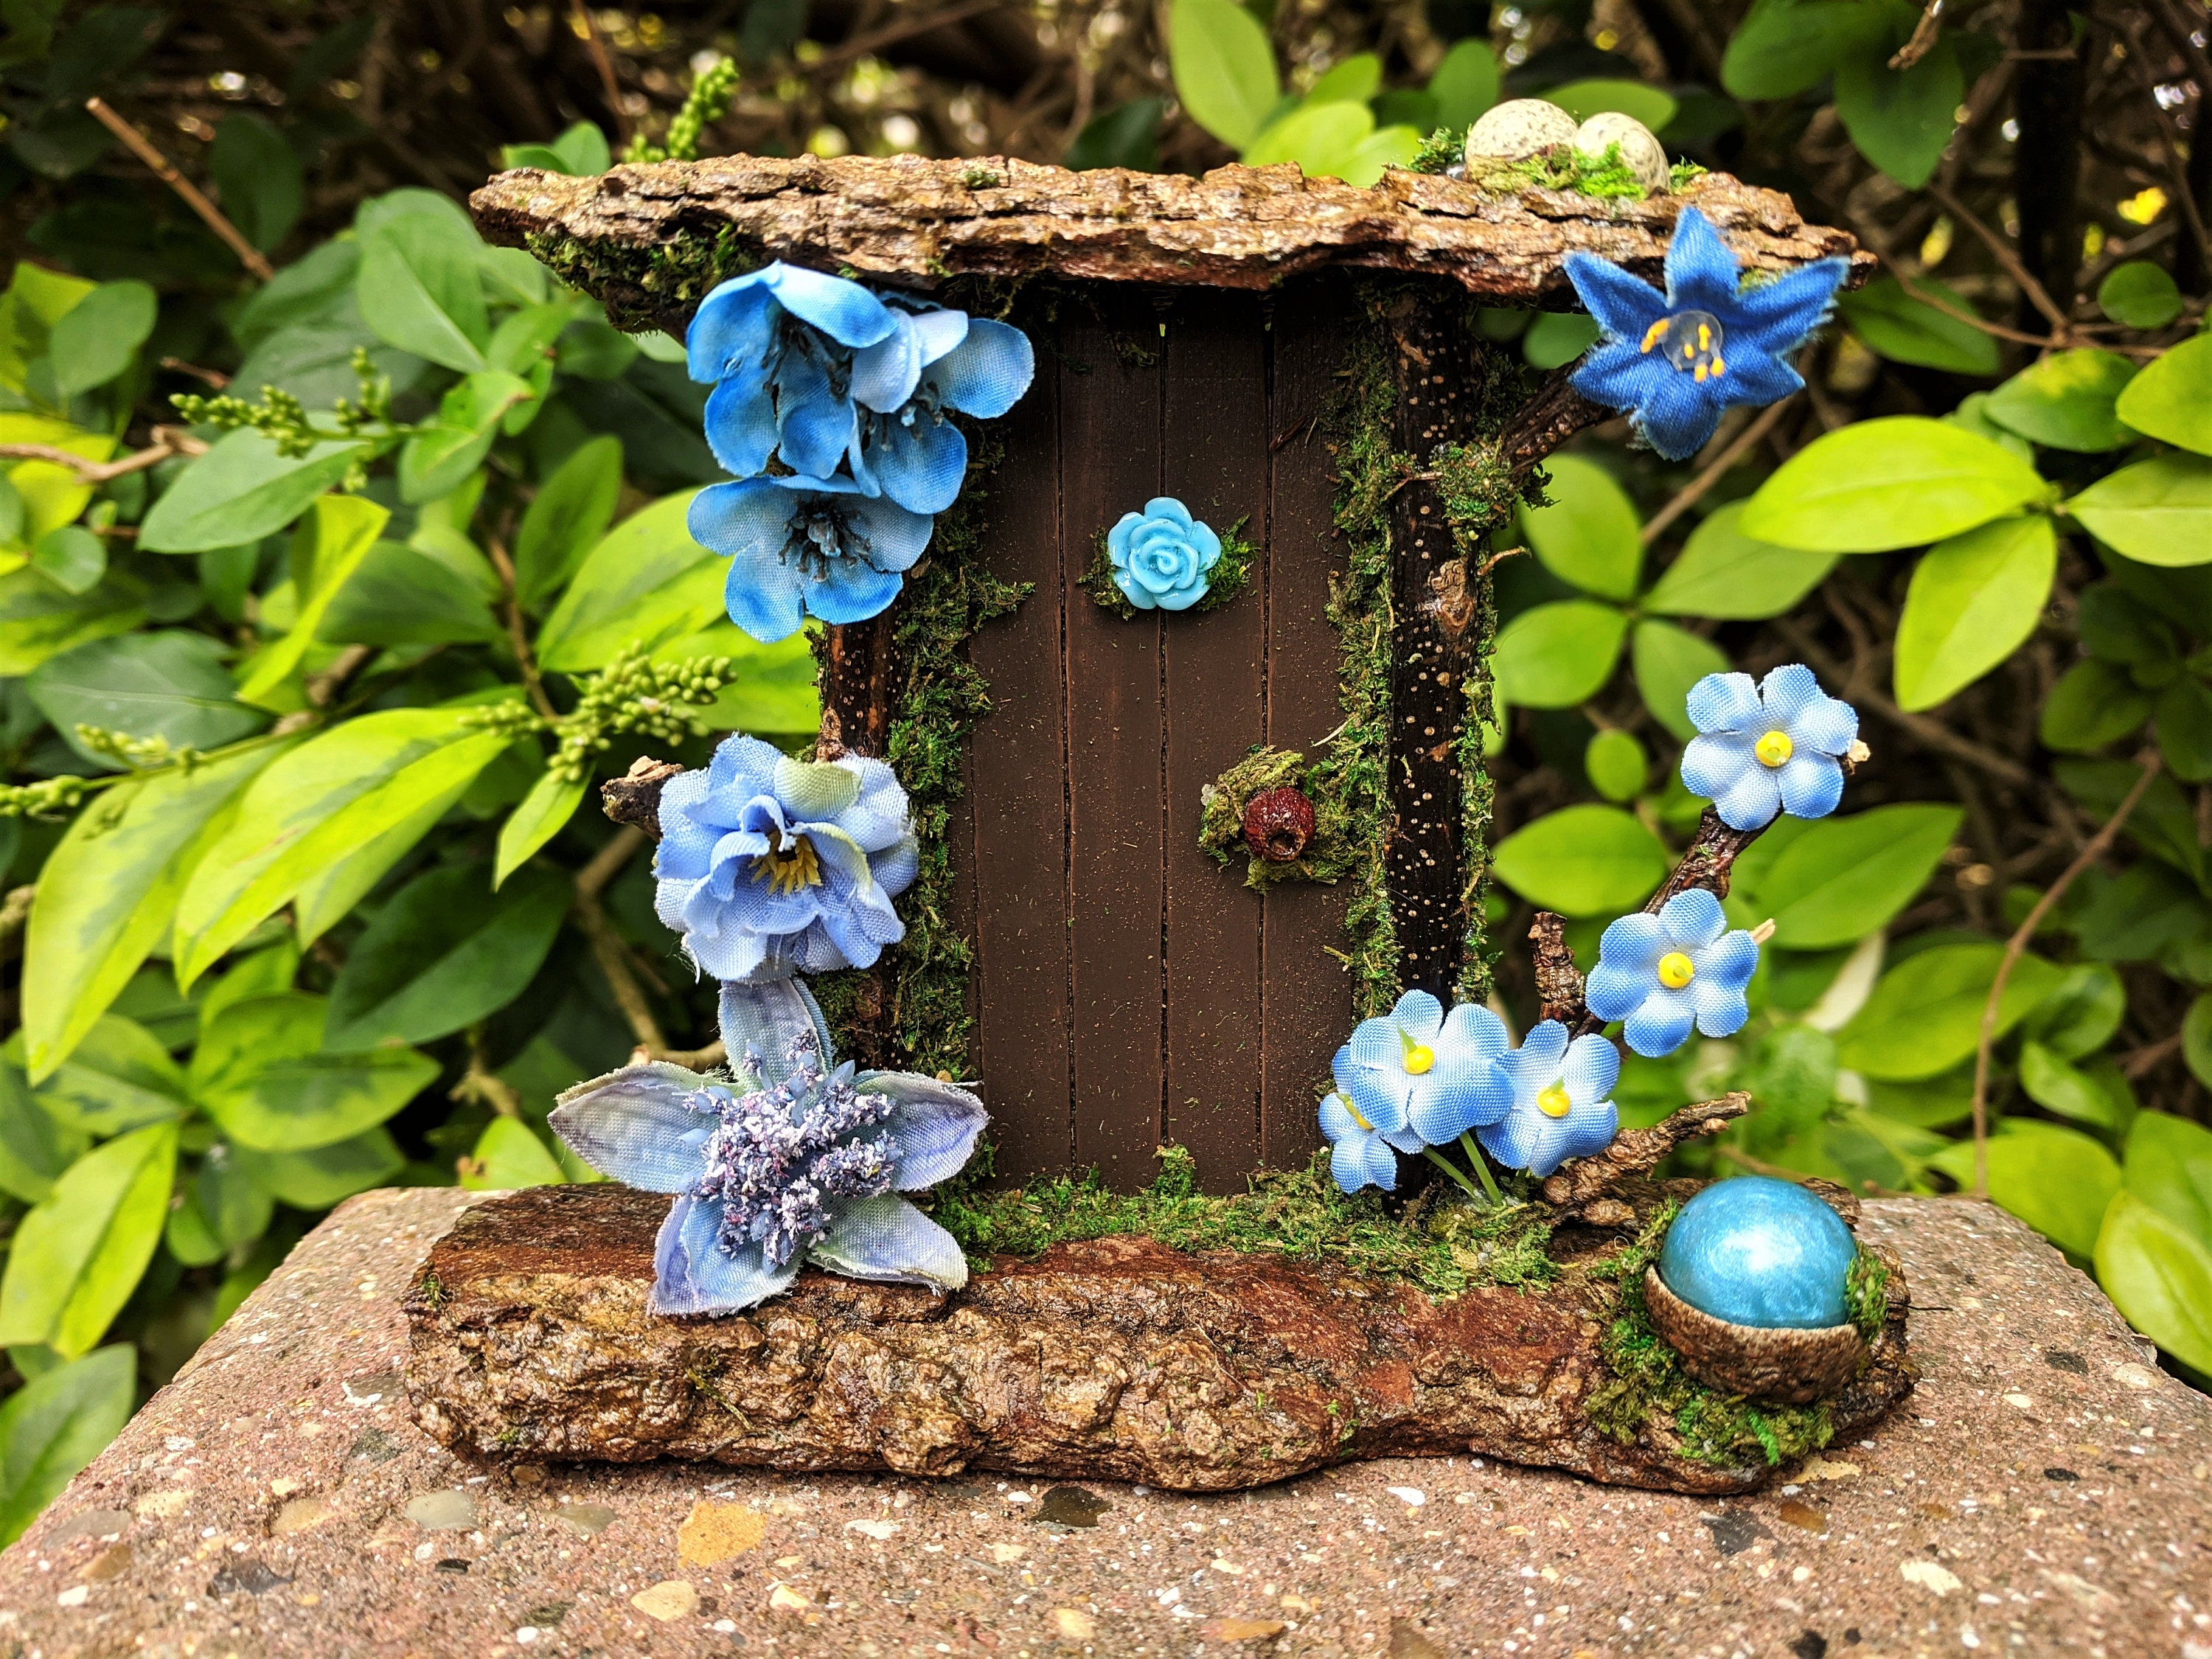 Blue Scooter Miniature Fairy Garden Home Decoration Craft Micro Landscaping  Decor Diy Gift Moving Forest - Figurines & Miniatures - AliExpress